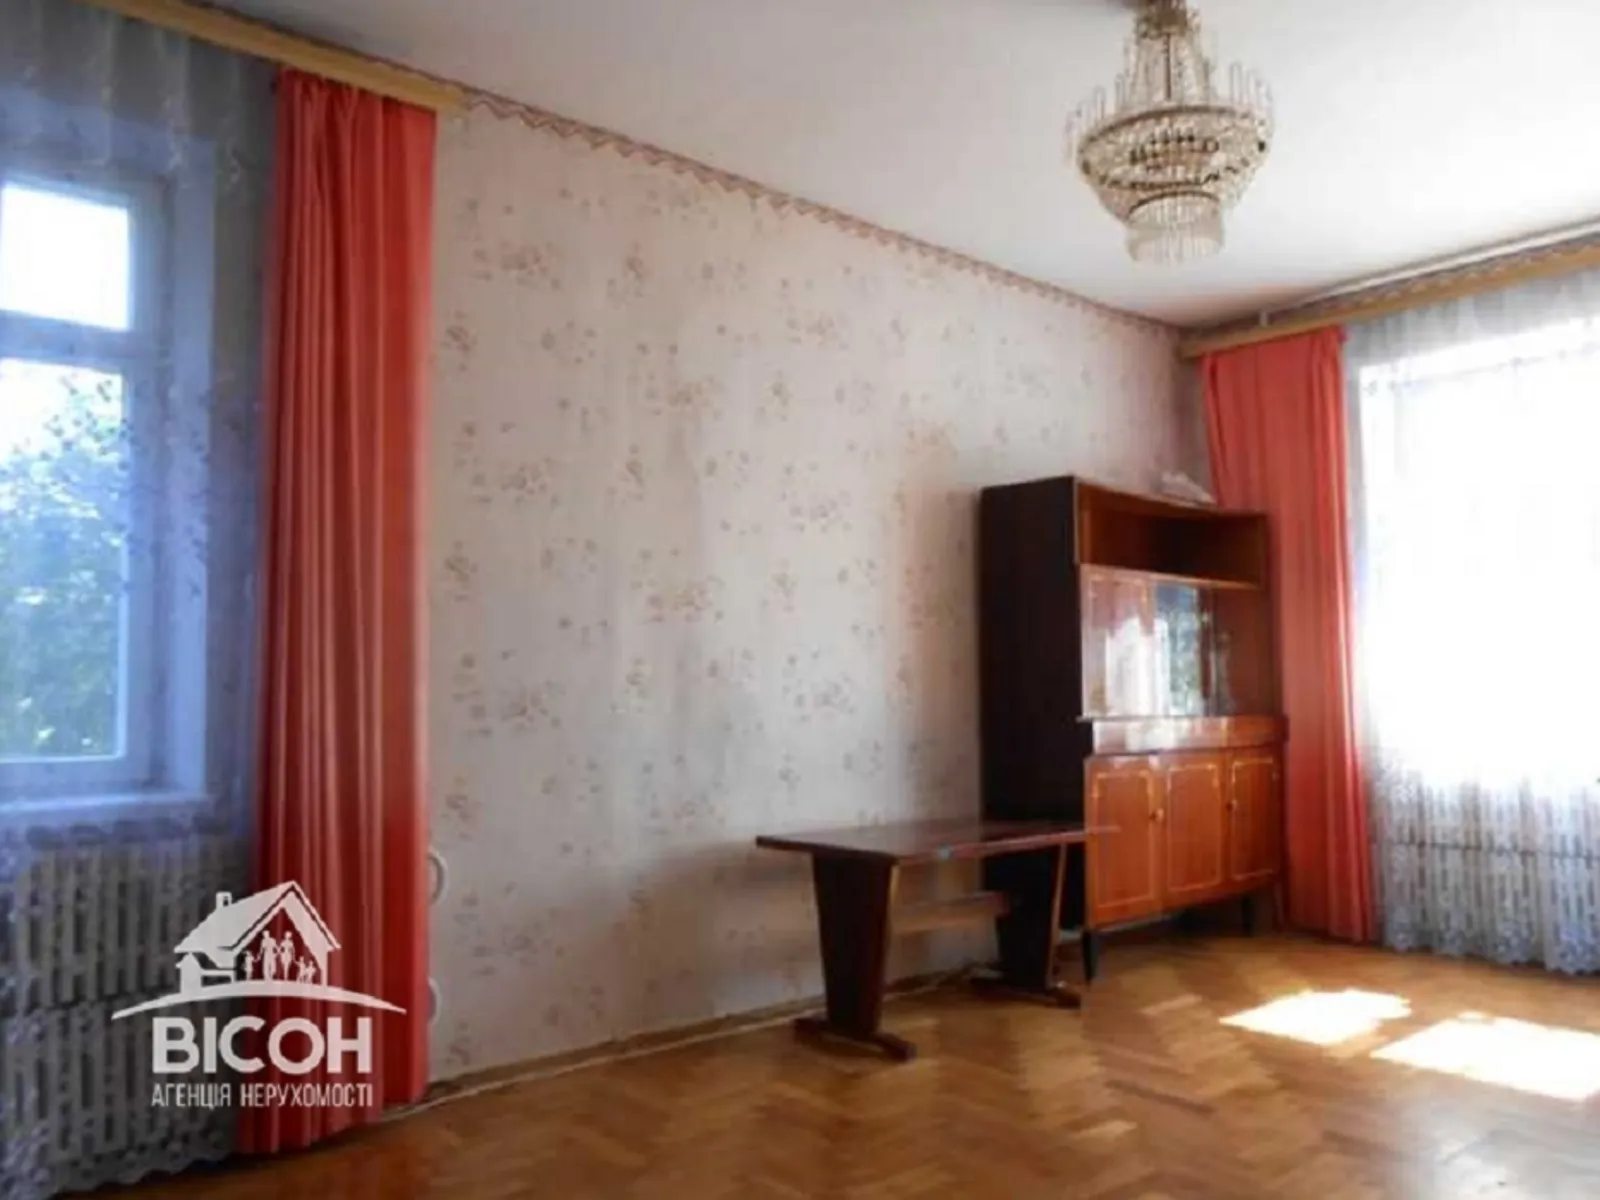 Apartments for sale. 2 rooms, 50 m², 1st floor/9 floors. Vostochnyy, Ternopil. 